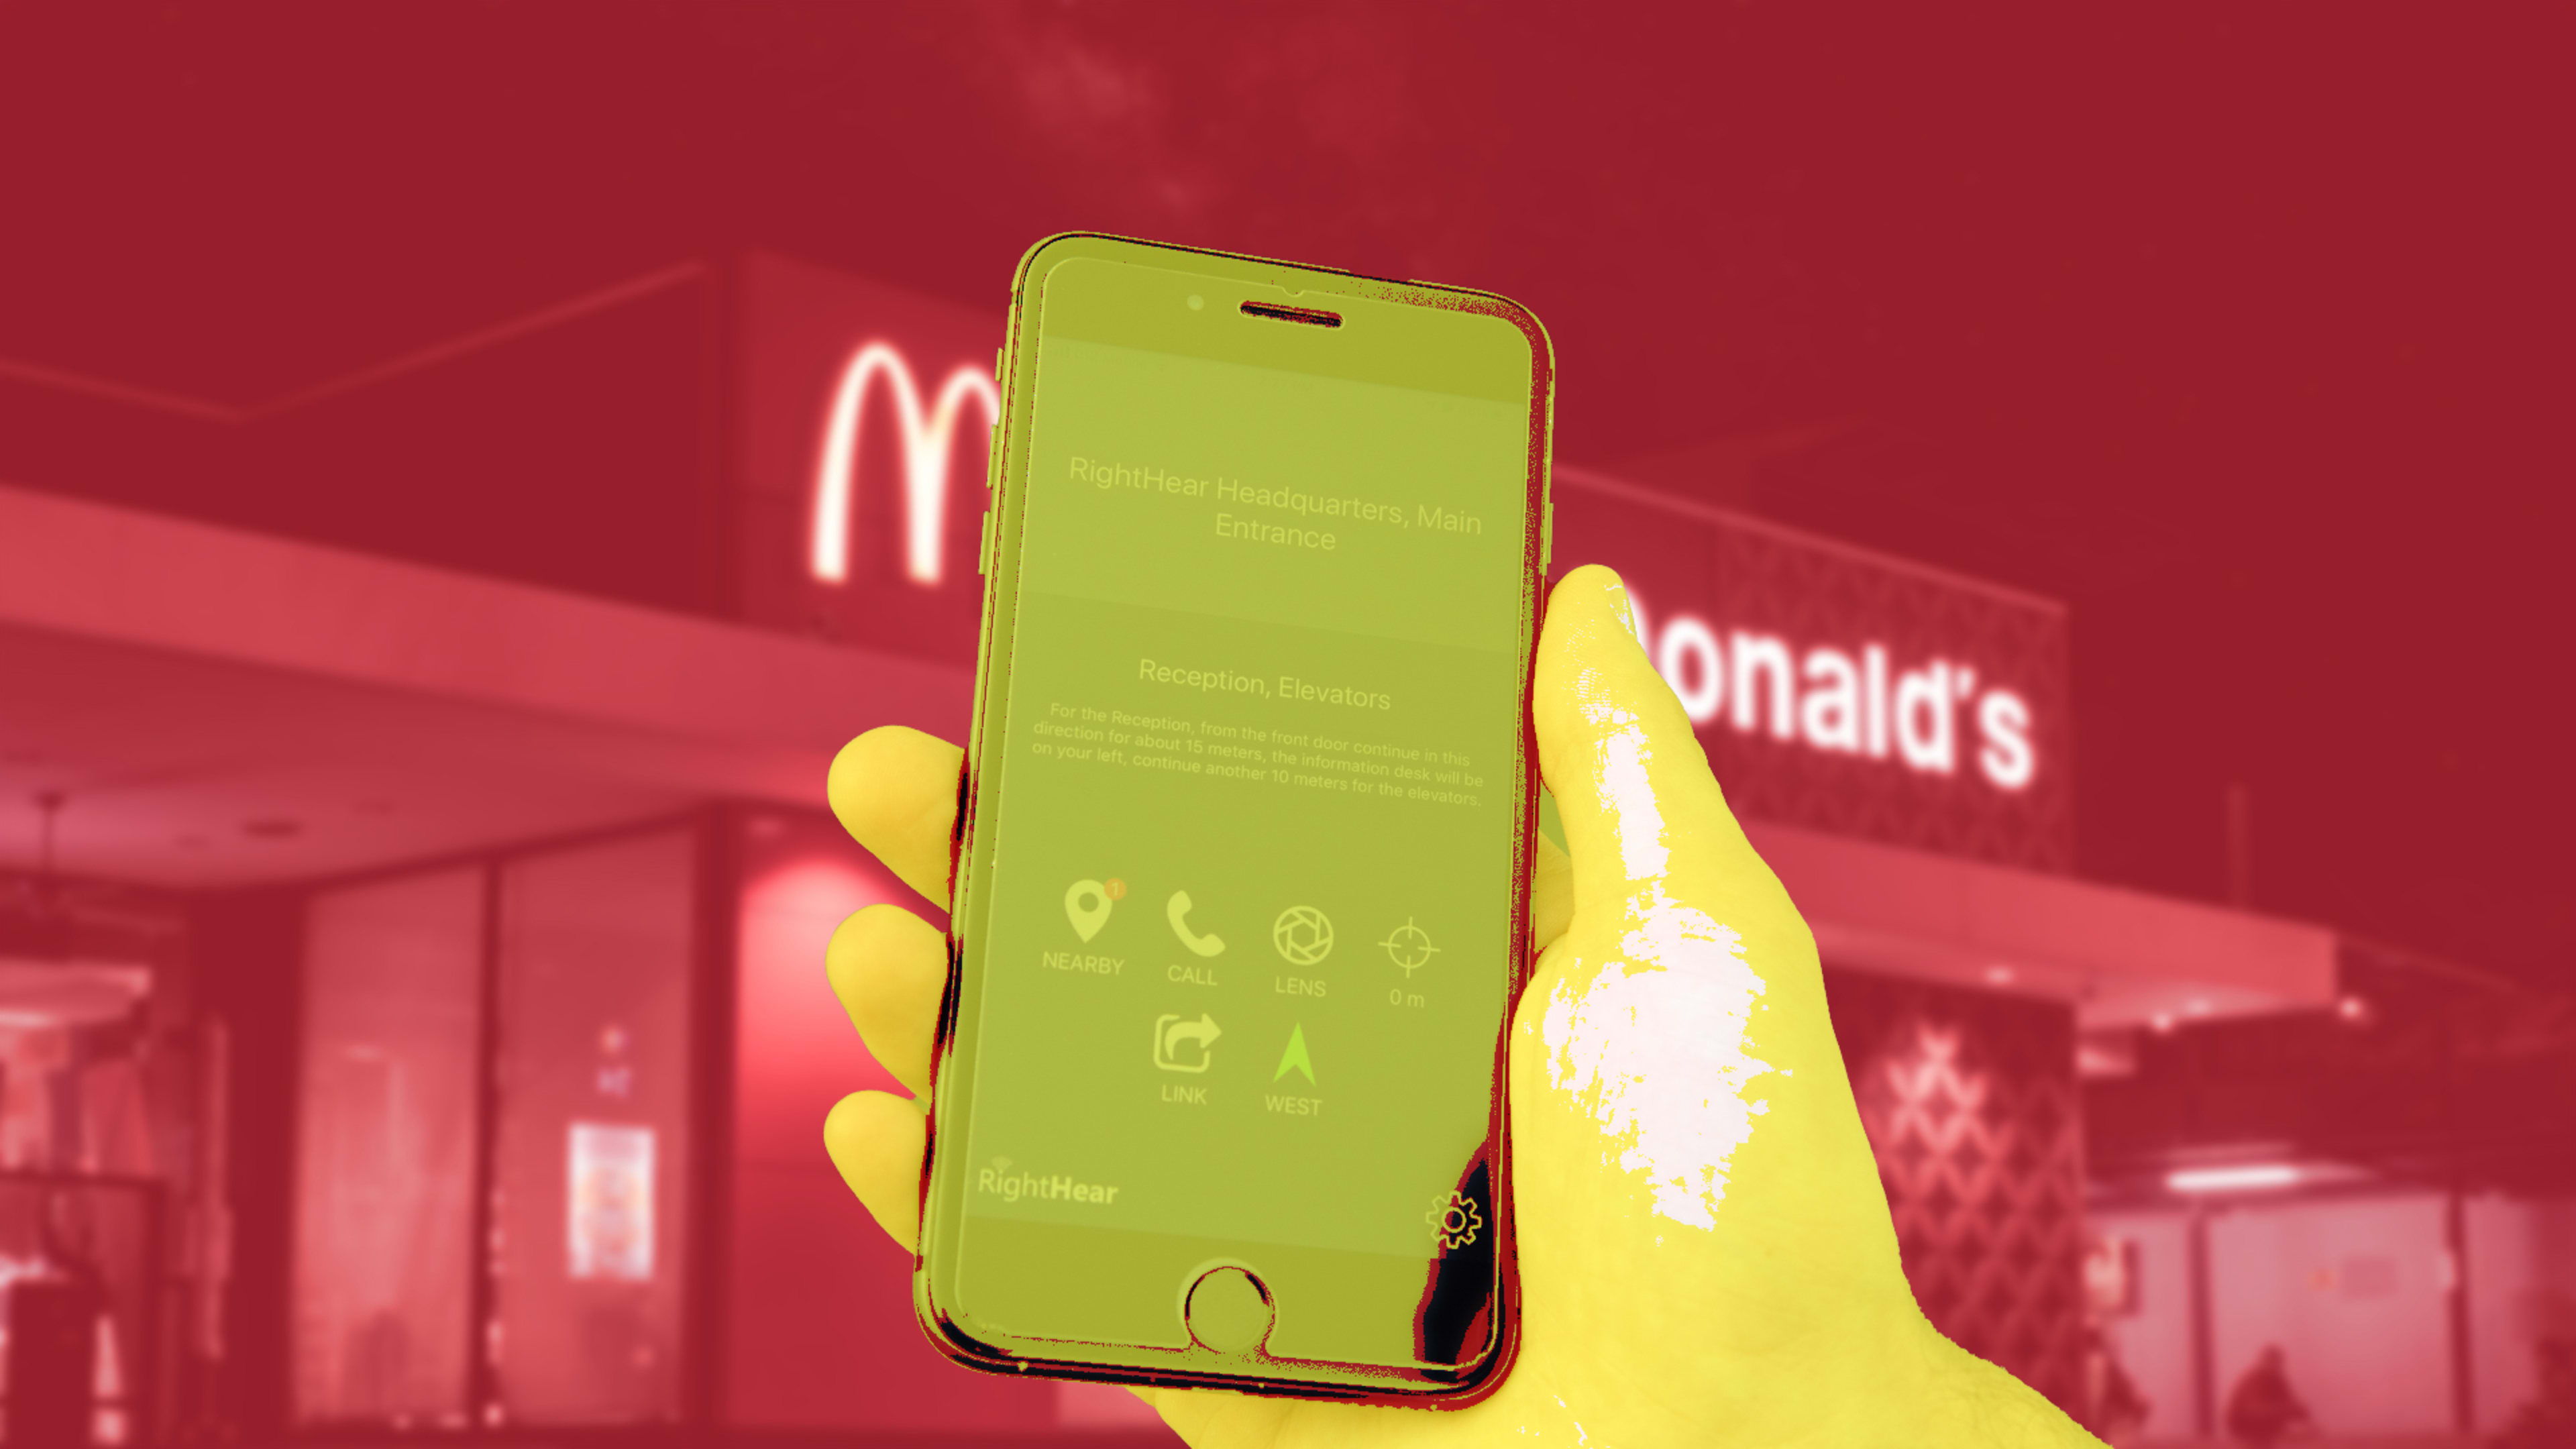 McDonald’s and RightHear expand their partnership to make fast food more accessible